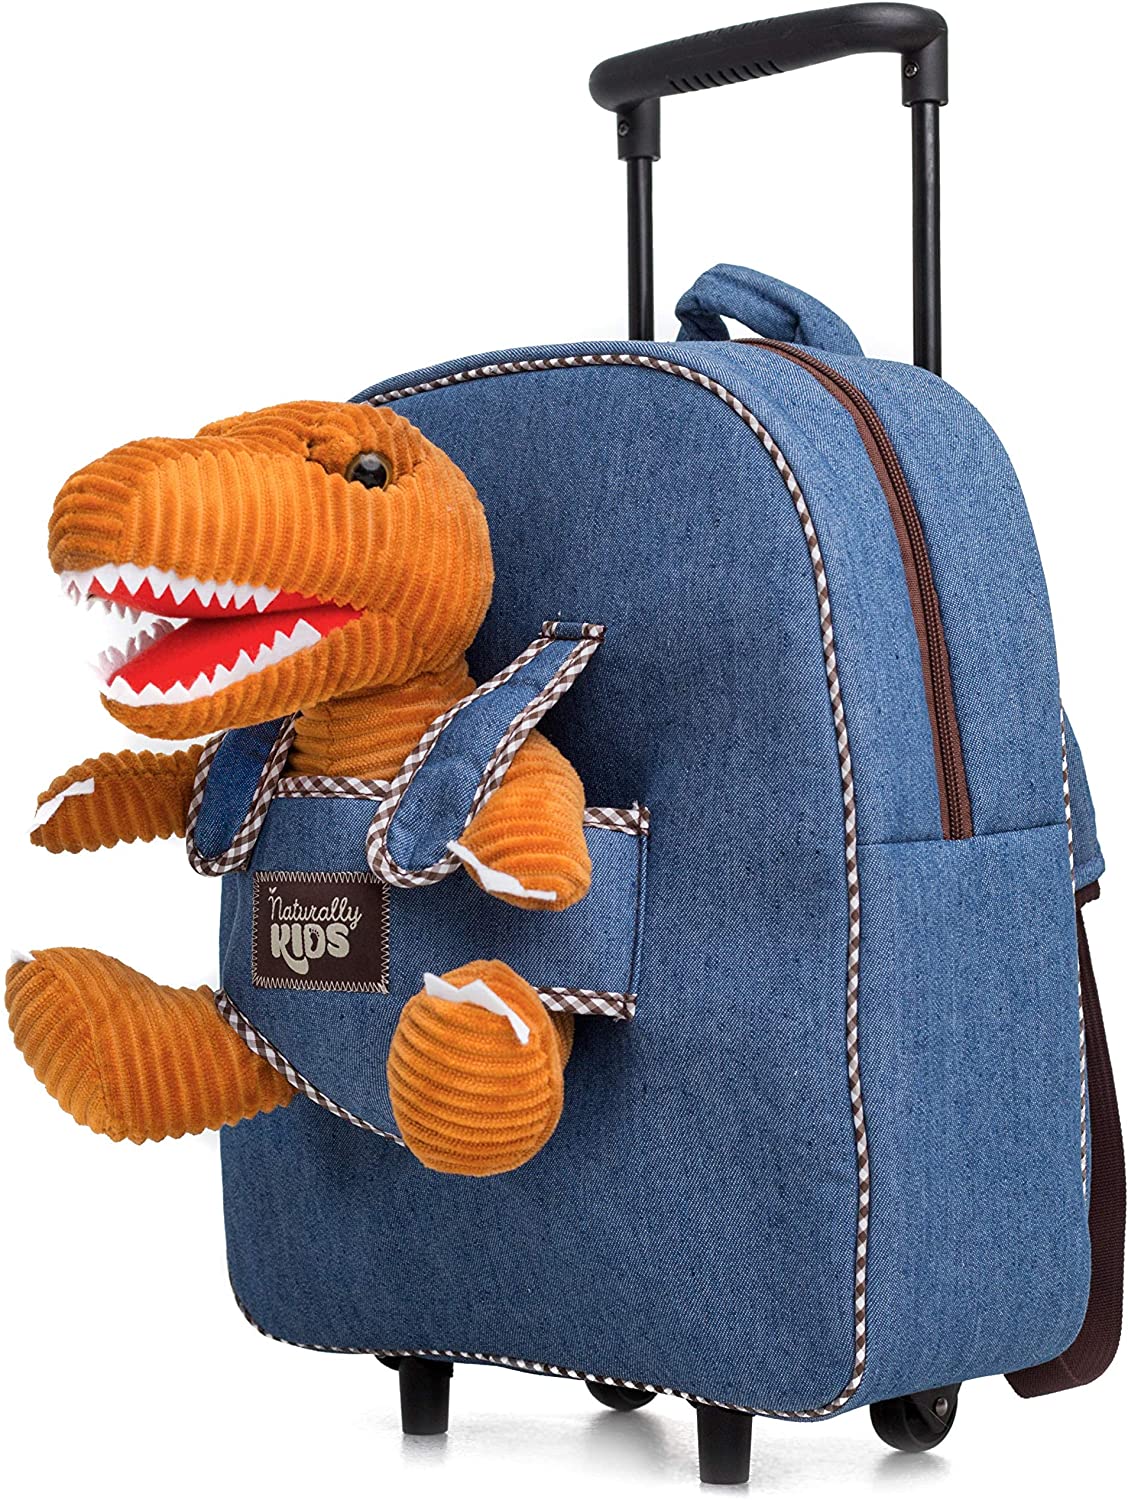 Personalisable Backpack - Mr Dino by Trixie